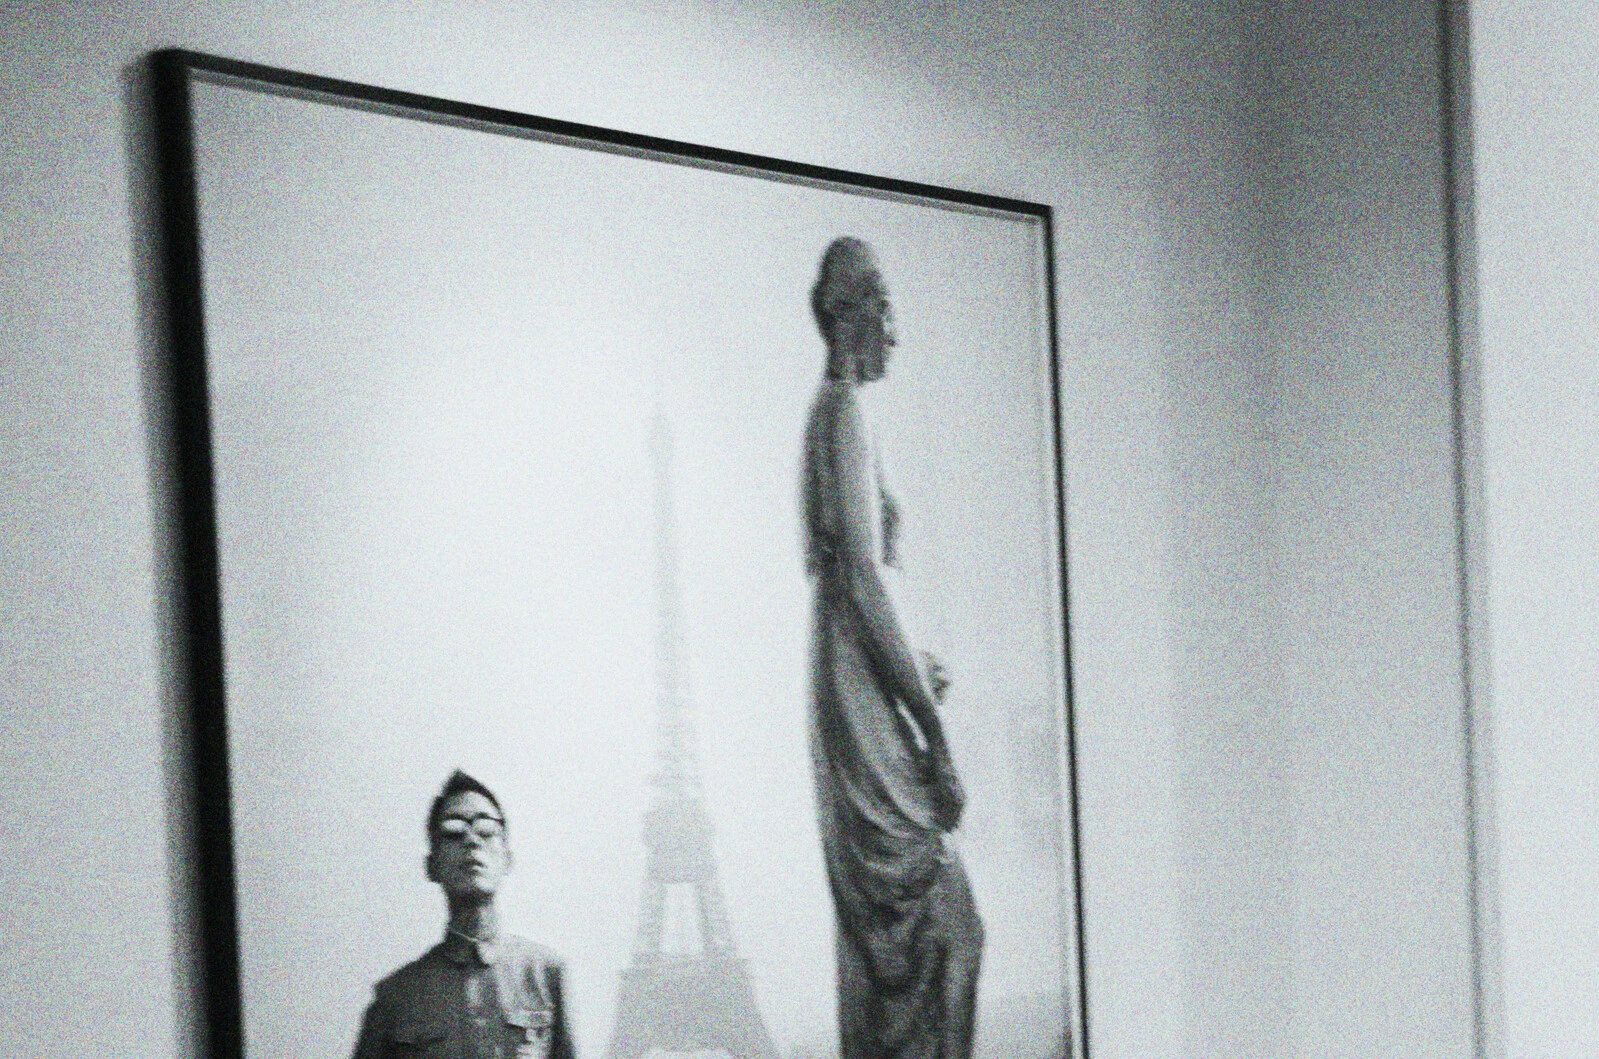 Greyscale image of the top half of a framed image of a sculpture and a person with the Eiffel Tower a hazy object in the background